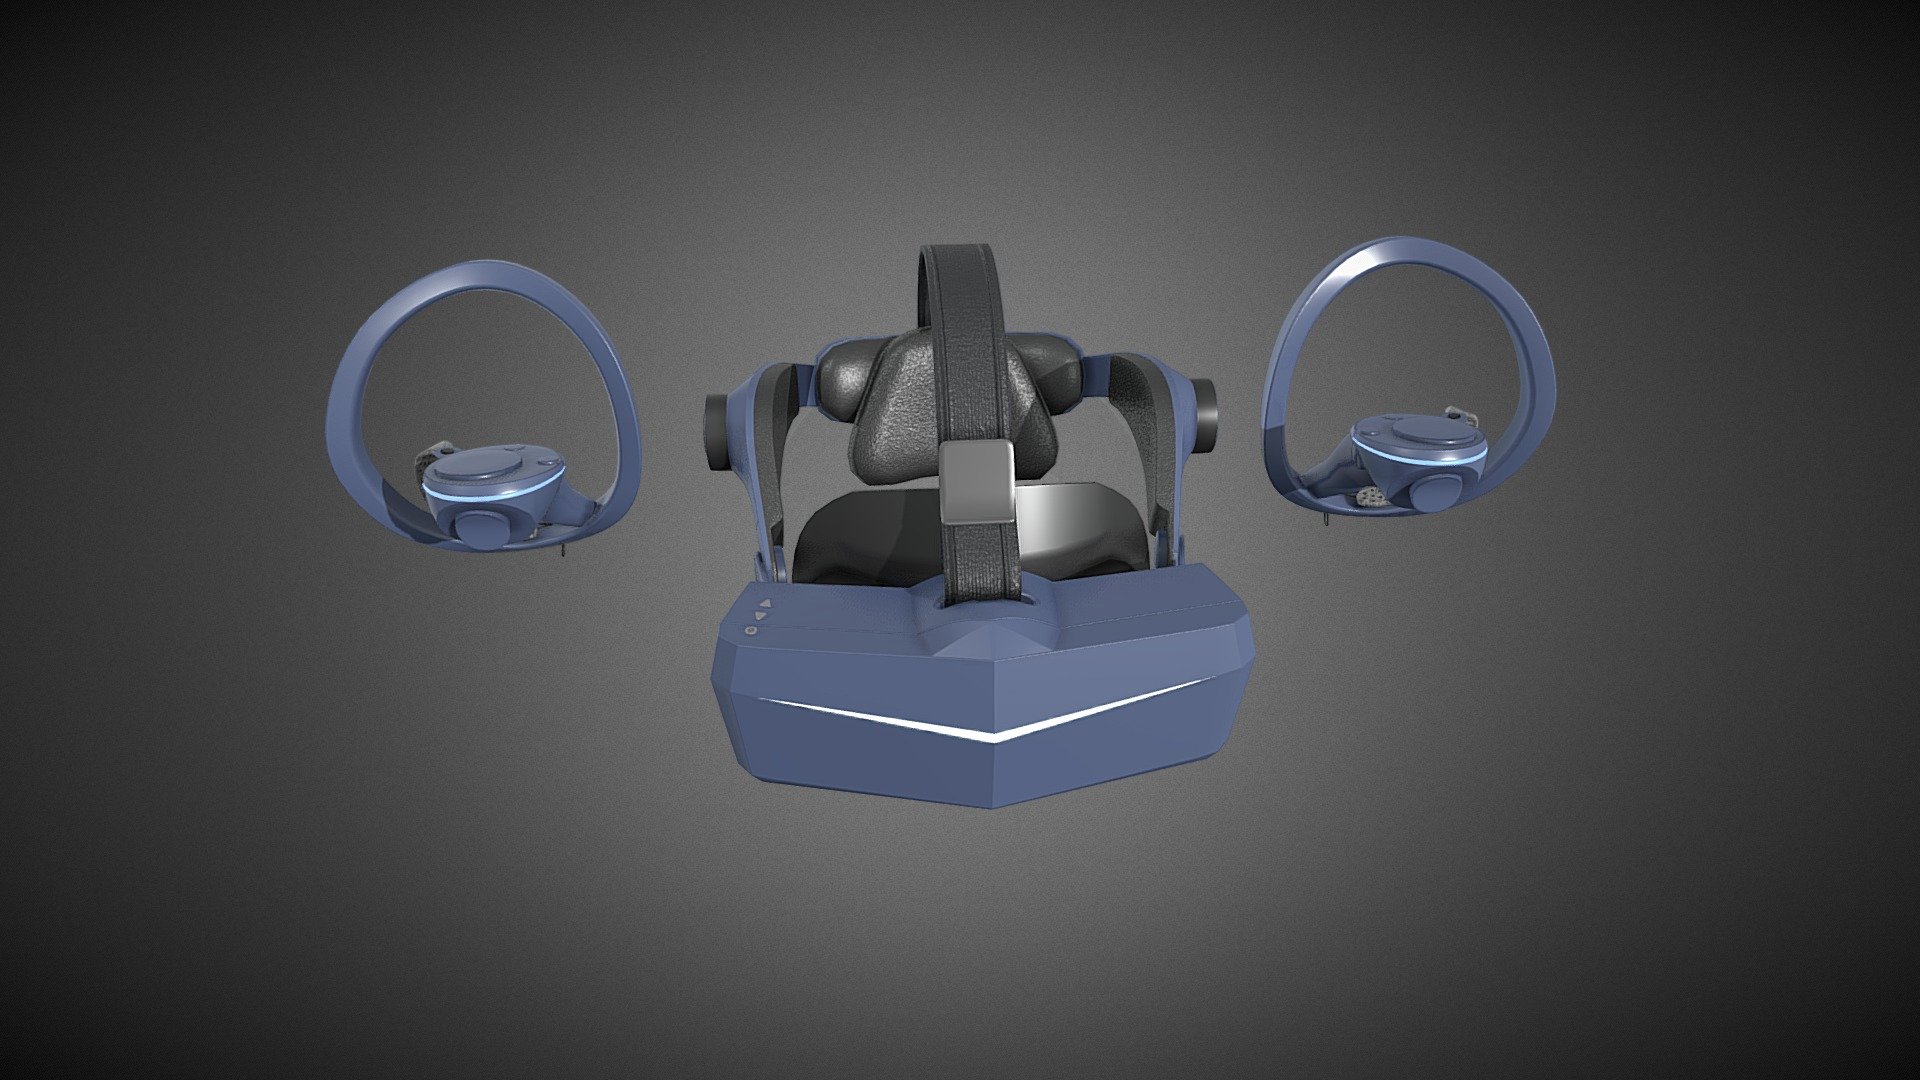 Pimax 5K Super contains low poly 3D models of VR Device with High Quality textures to fill up your game environment. The assets are VR-Ready and game ready.

Total Polygons - 14717

Total Tris - 29356

These models are delivered without any brandings or logos attached. The End users/Buyers are solely responsible for ensuring compliance with any branding or trademark requirements applicable to their specific projects.

For Unity3d (Built-in, URP, HDRP) Ready Assets visit our Unity Asset Store Page

Enjoy and please rate the asset!

Contact us on for AR/VR related queries and development support

Gmail - designer@devdensolutions.com

Website

Instagram

Facebook

Linkedin

Youtube

Buy Pizza - Pimax 5k Super - Buy Royalty Free 3D model by Devden 3d model